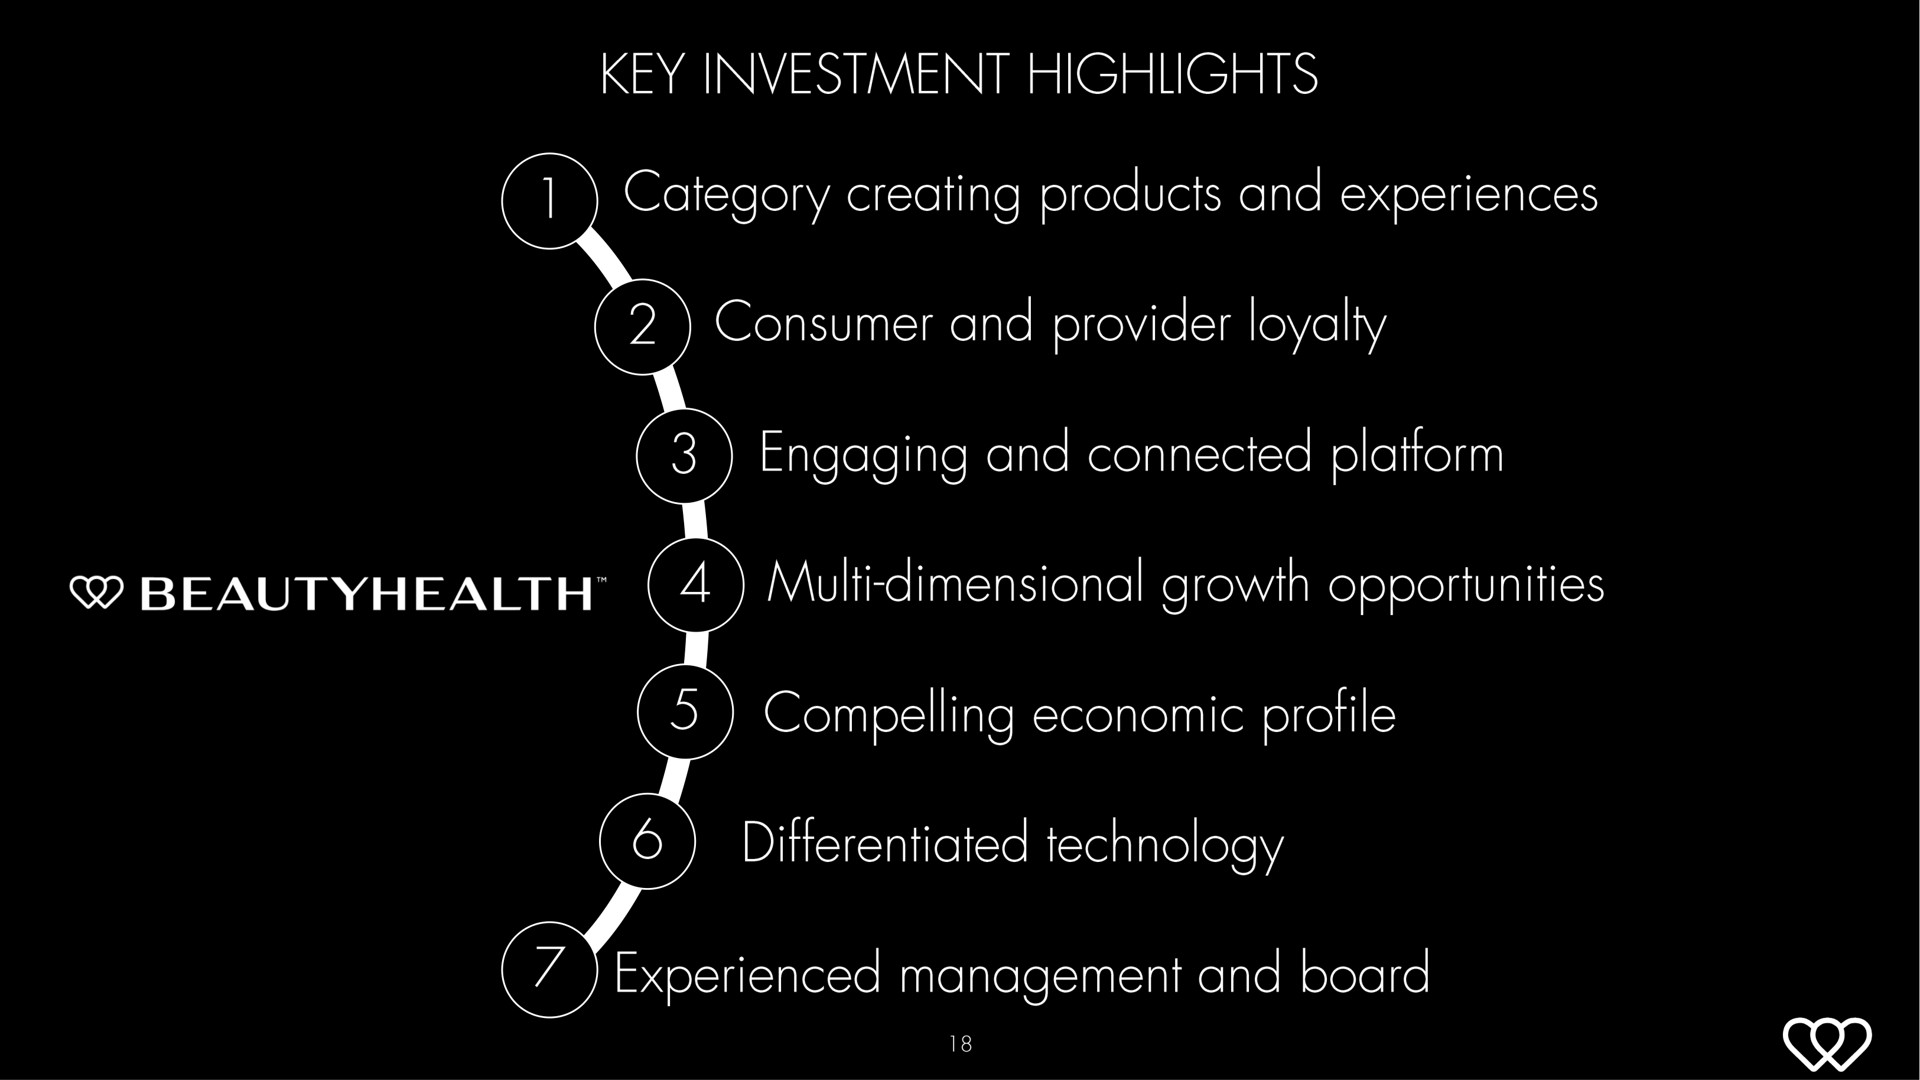 key investment consumer and provider loyalty engaging and connected platform multidimensional growth opportunities compelling economic technology experienced management and board | Hydrafacial